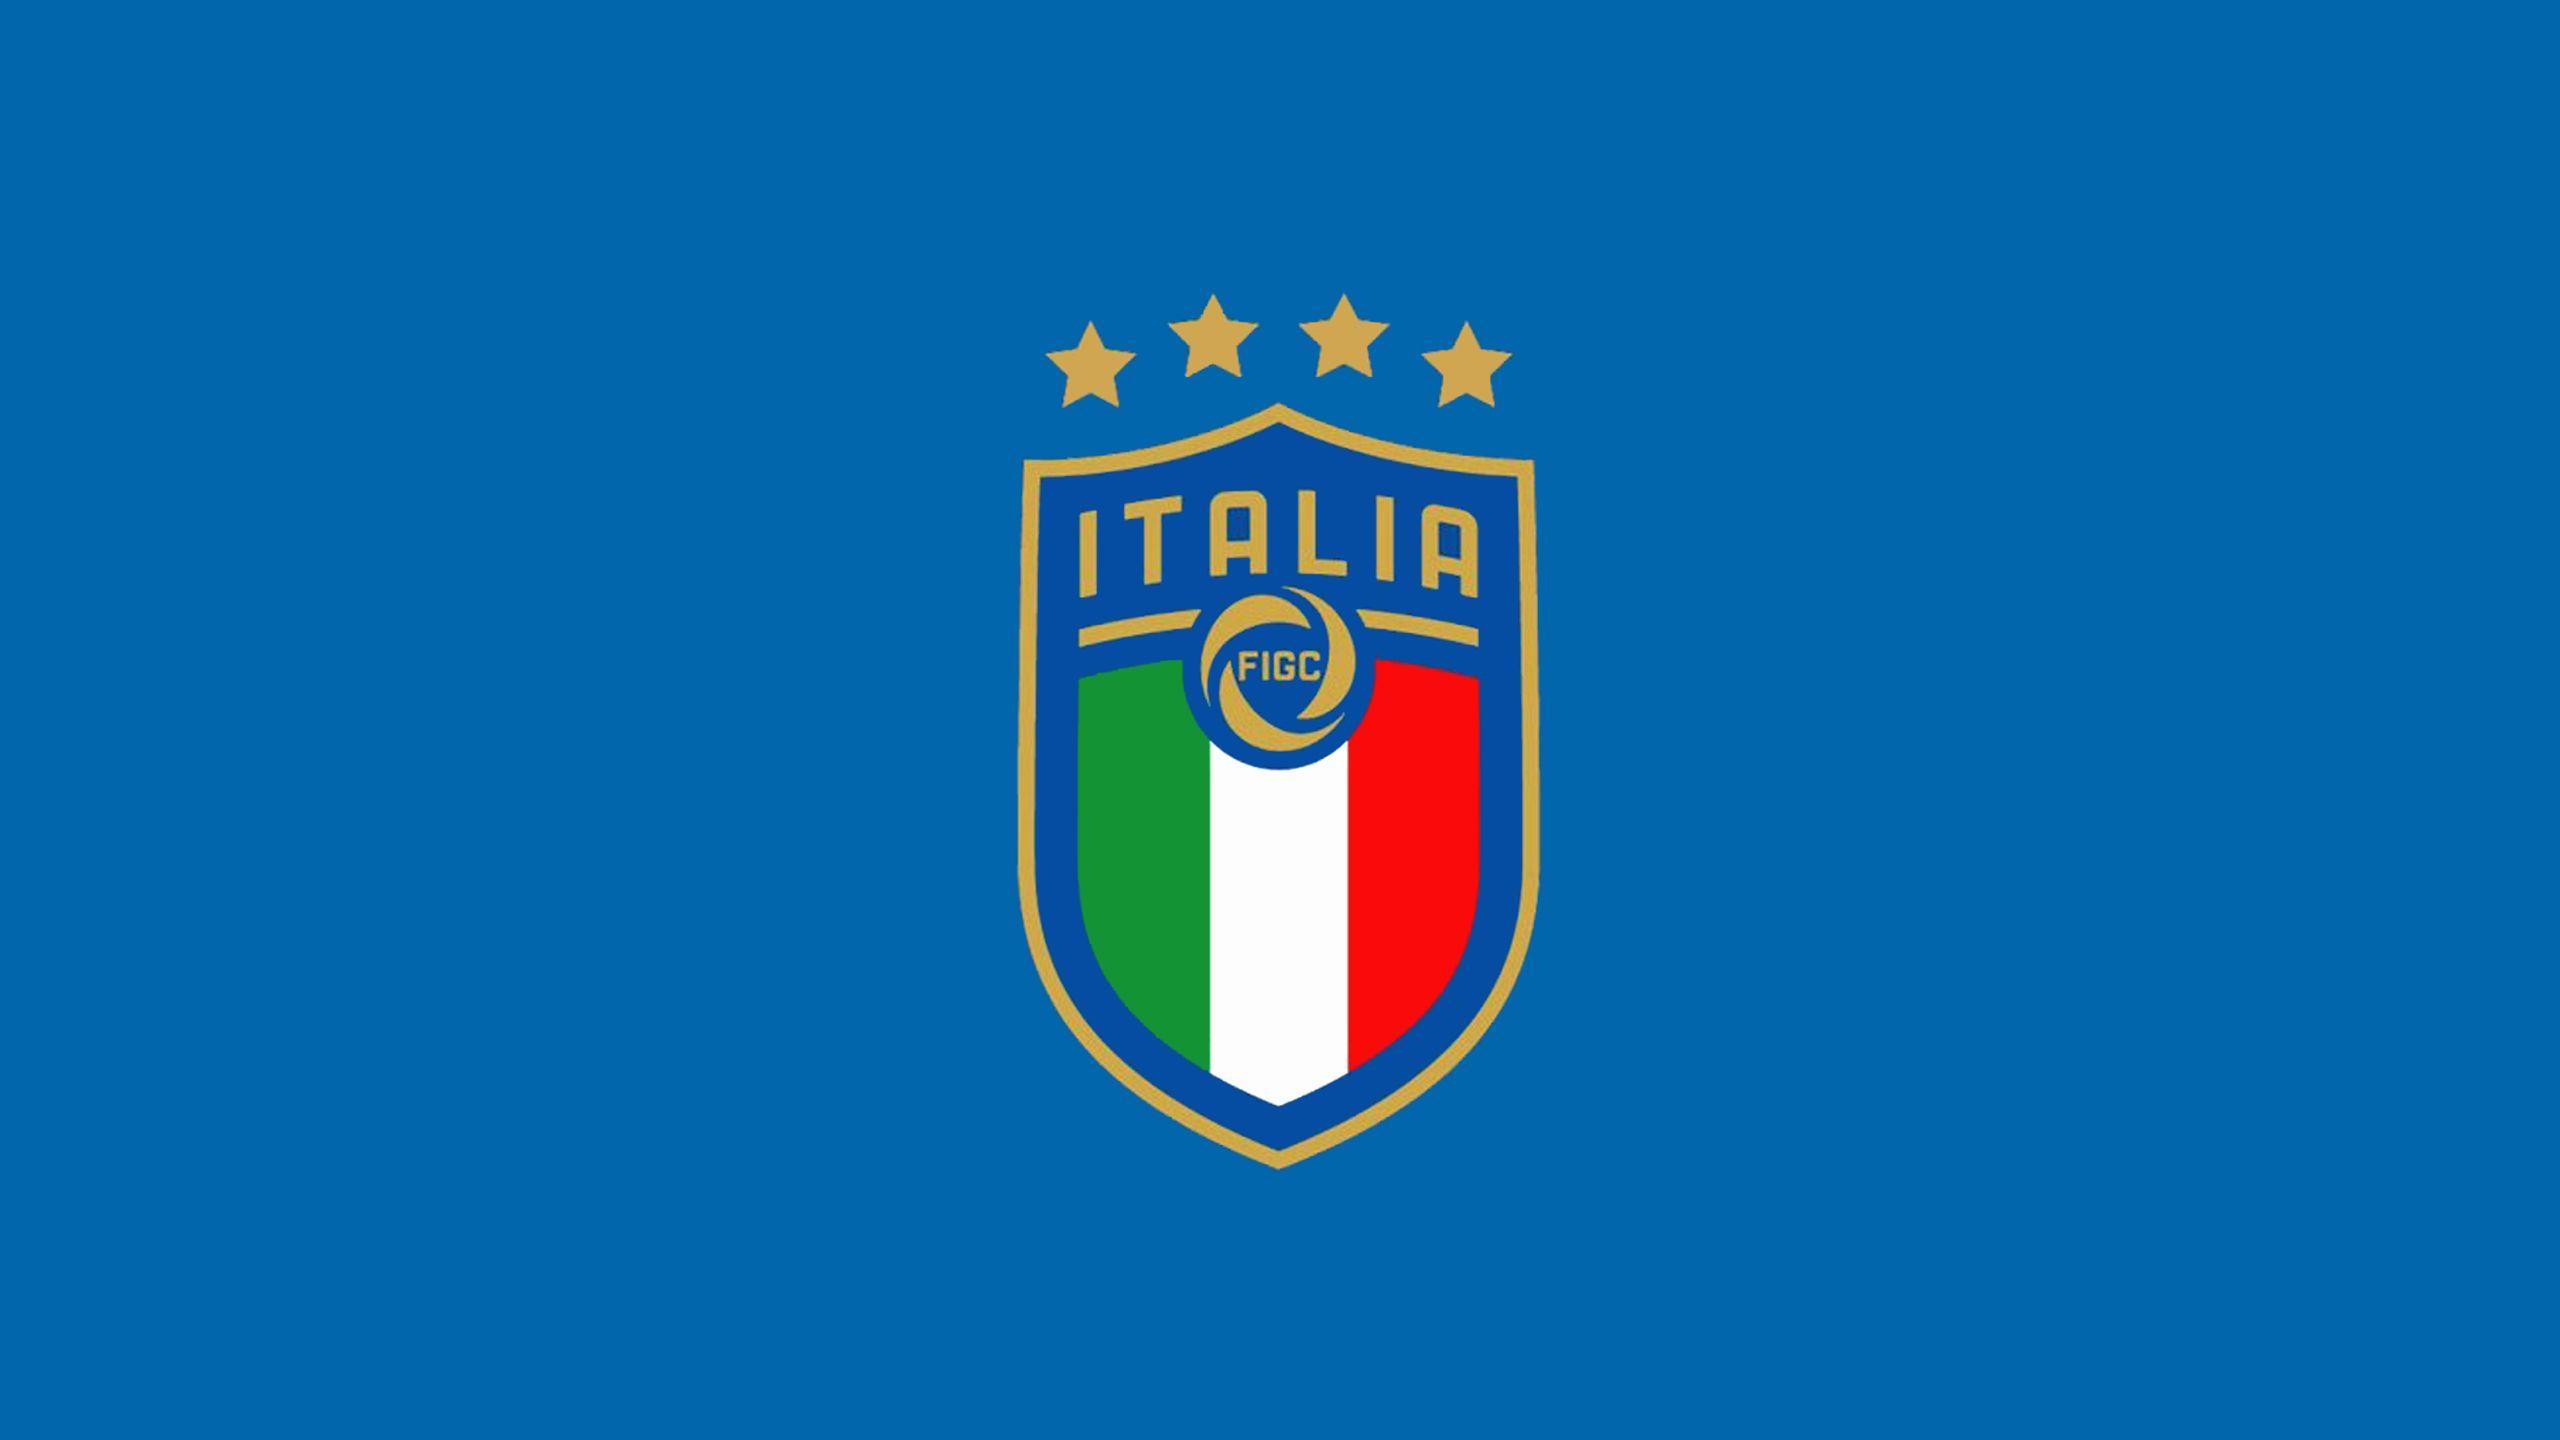 New FIGC National Team Crest